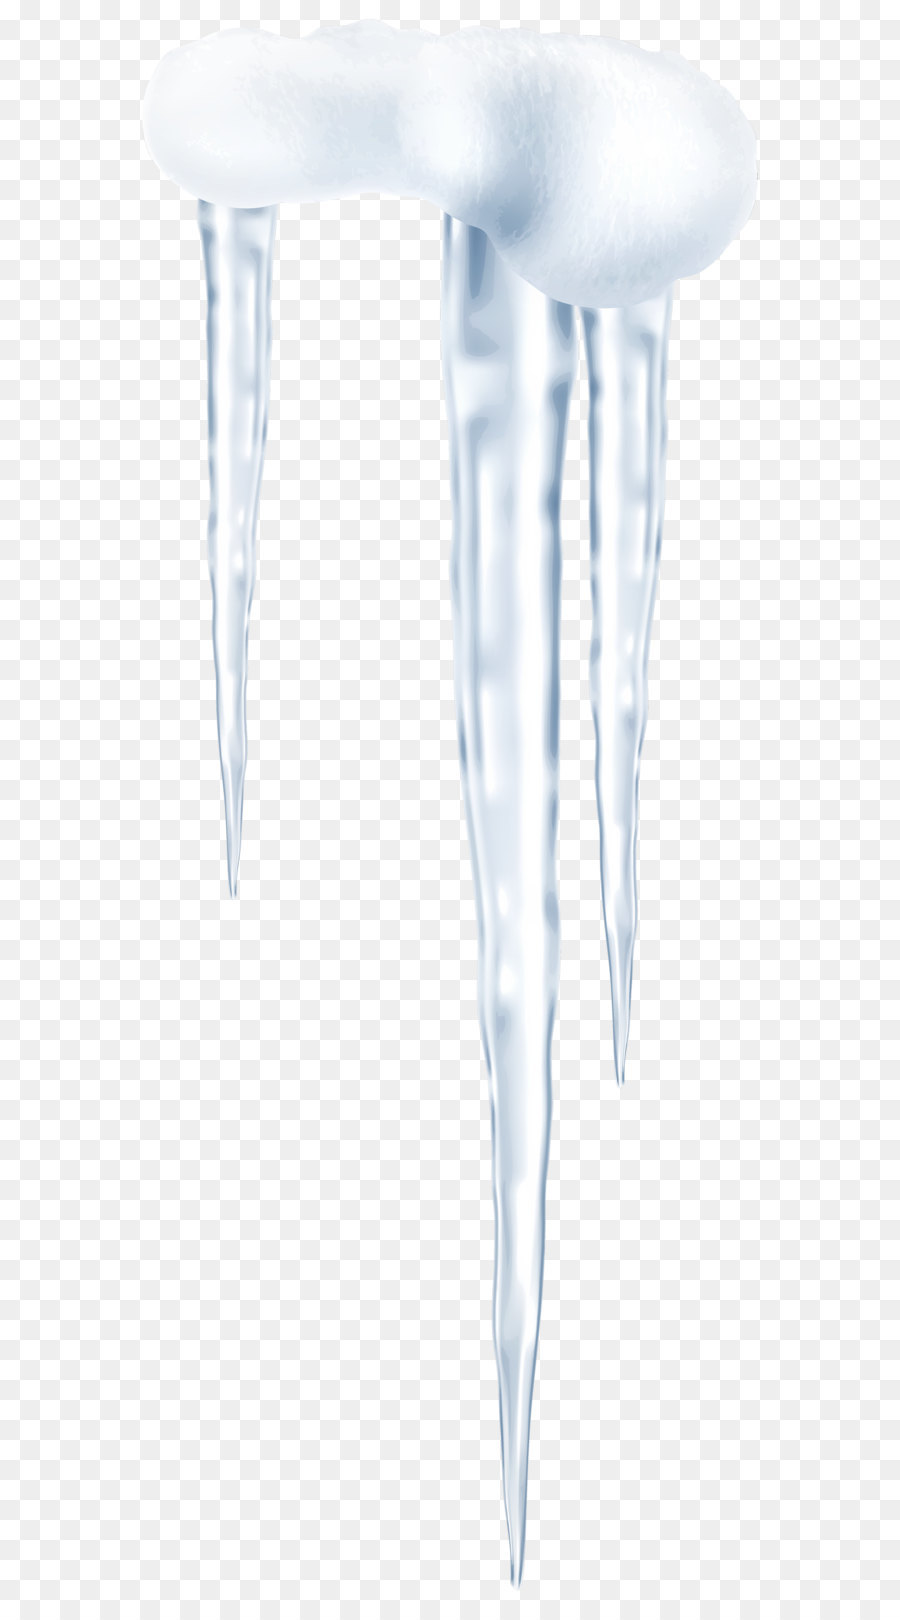 Ice - Small Icicles Transparent PNG Clip Art Image png download - 2068*5138 - Free Transparent Table png Download.